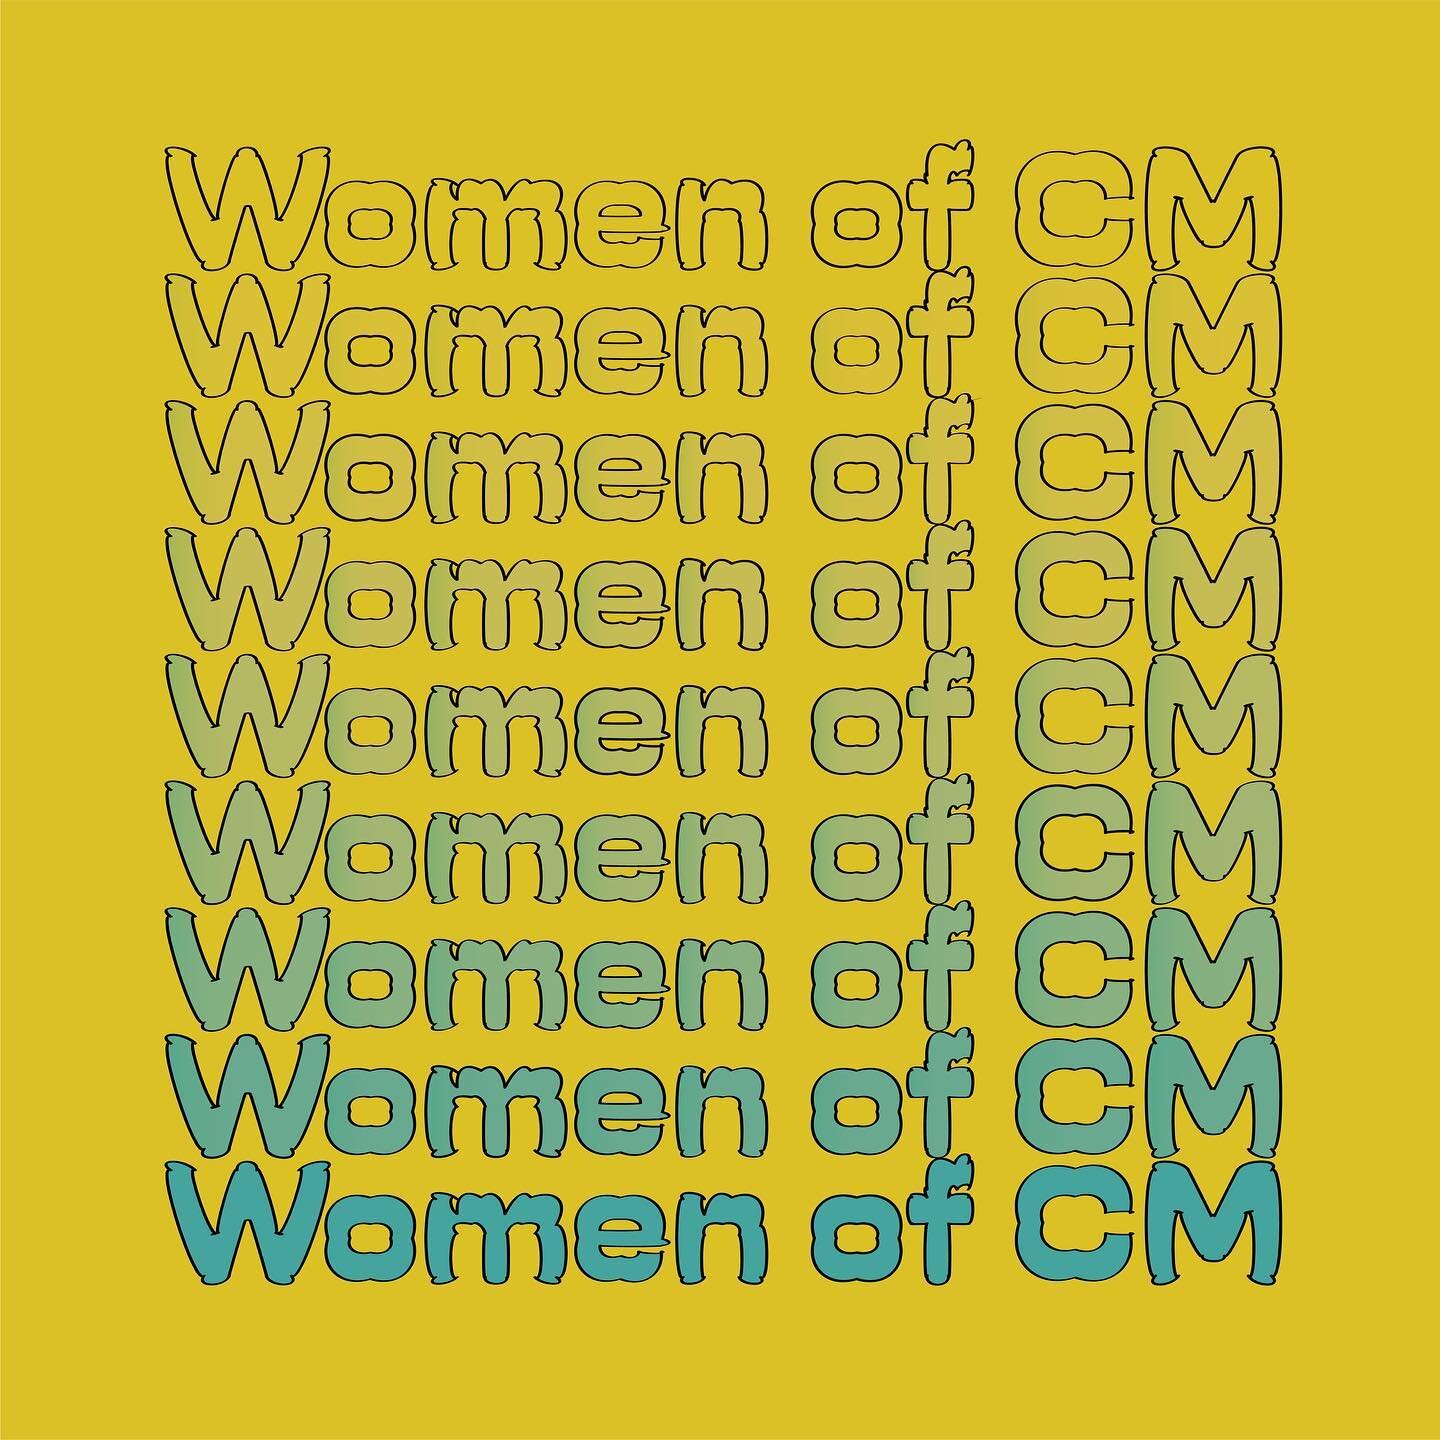 Meet the Women of CM 👑

We wanted to round out #womenshistorymonth with a spotlight on our badass team.